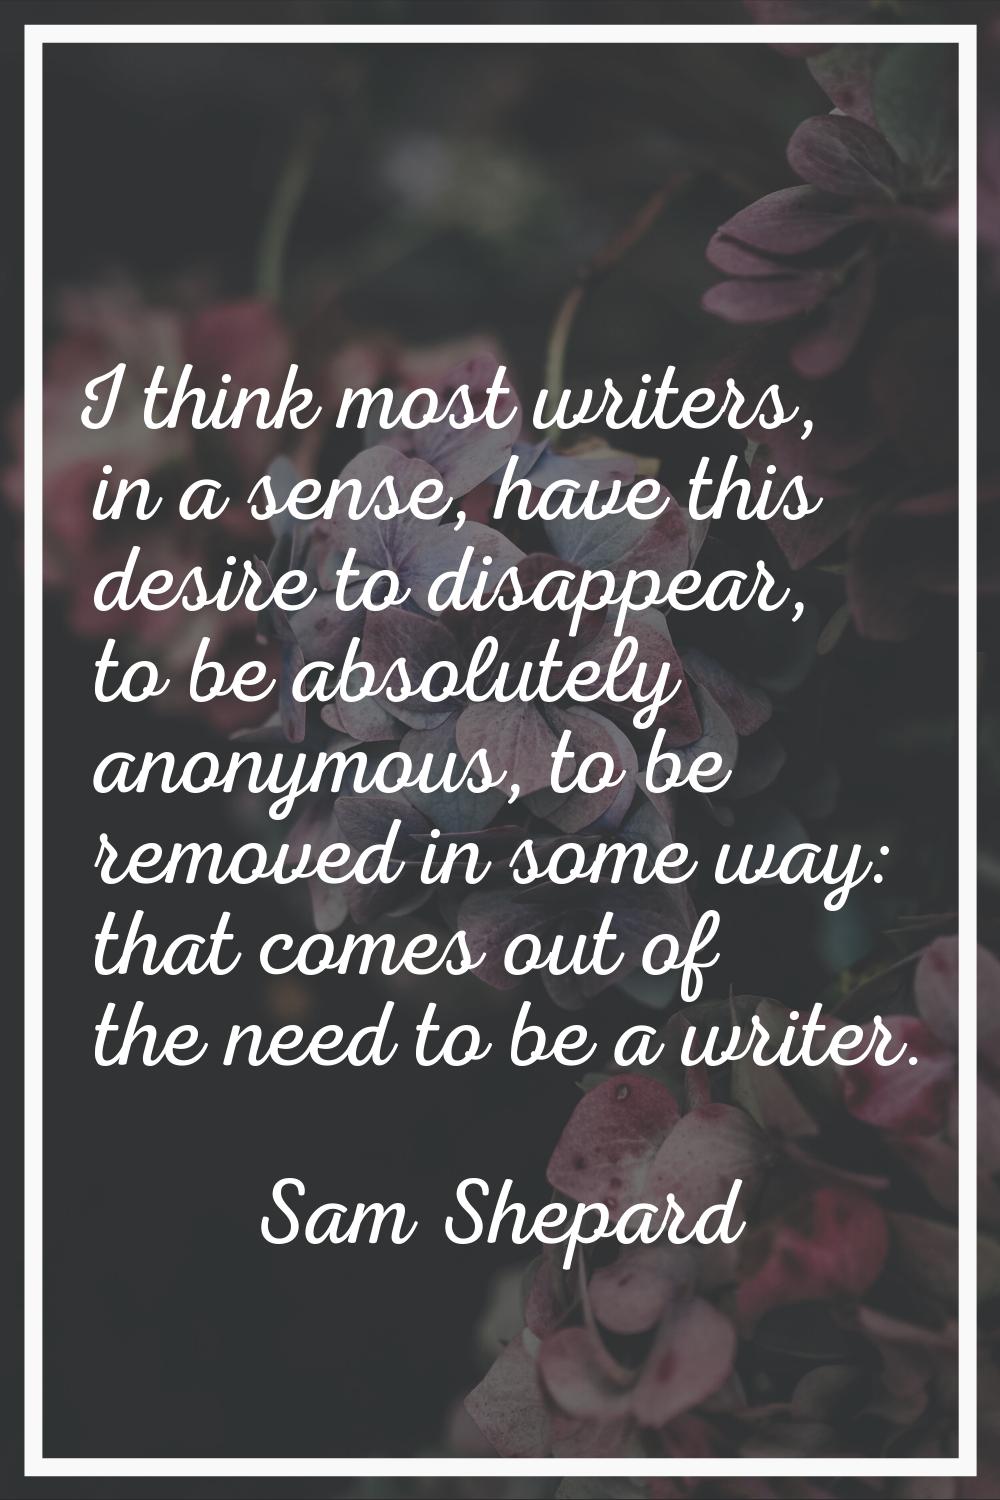 I think most writers, in a sense, have this desire to disappear, to be absolutely anonymous, to be 